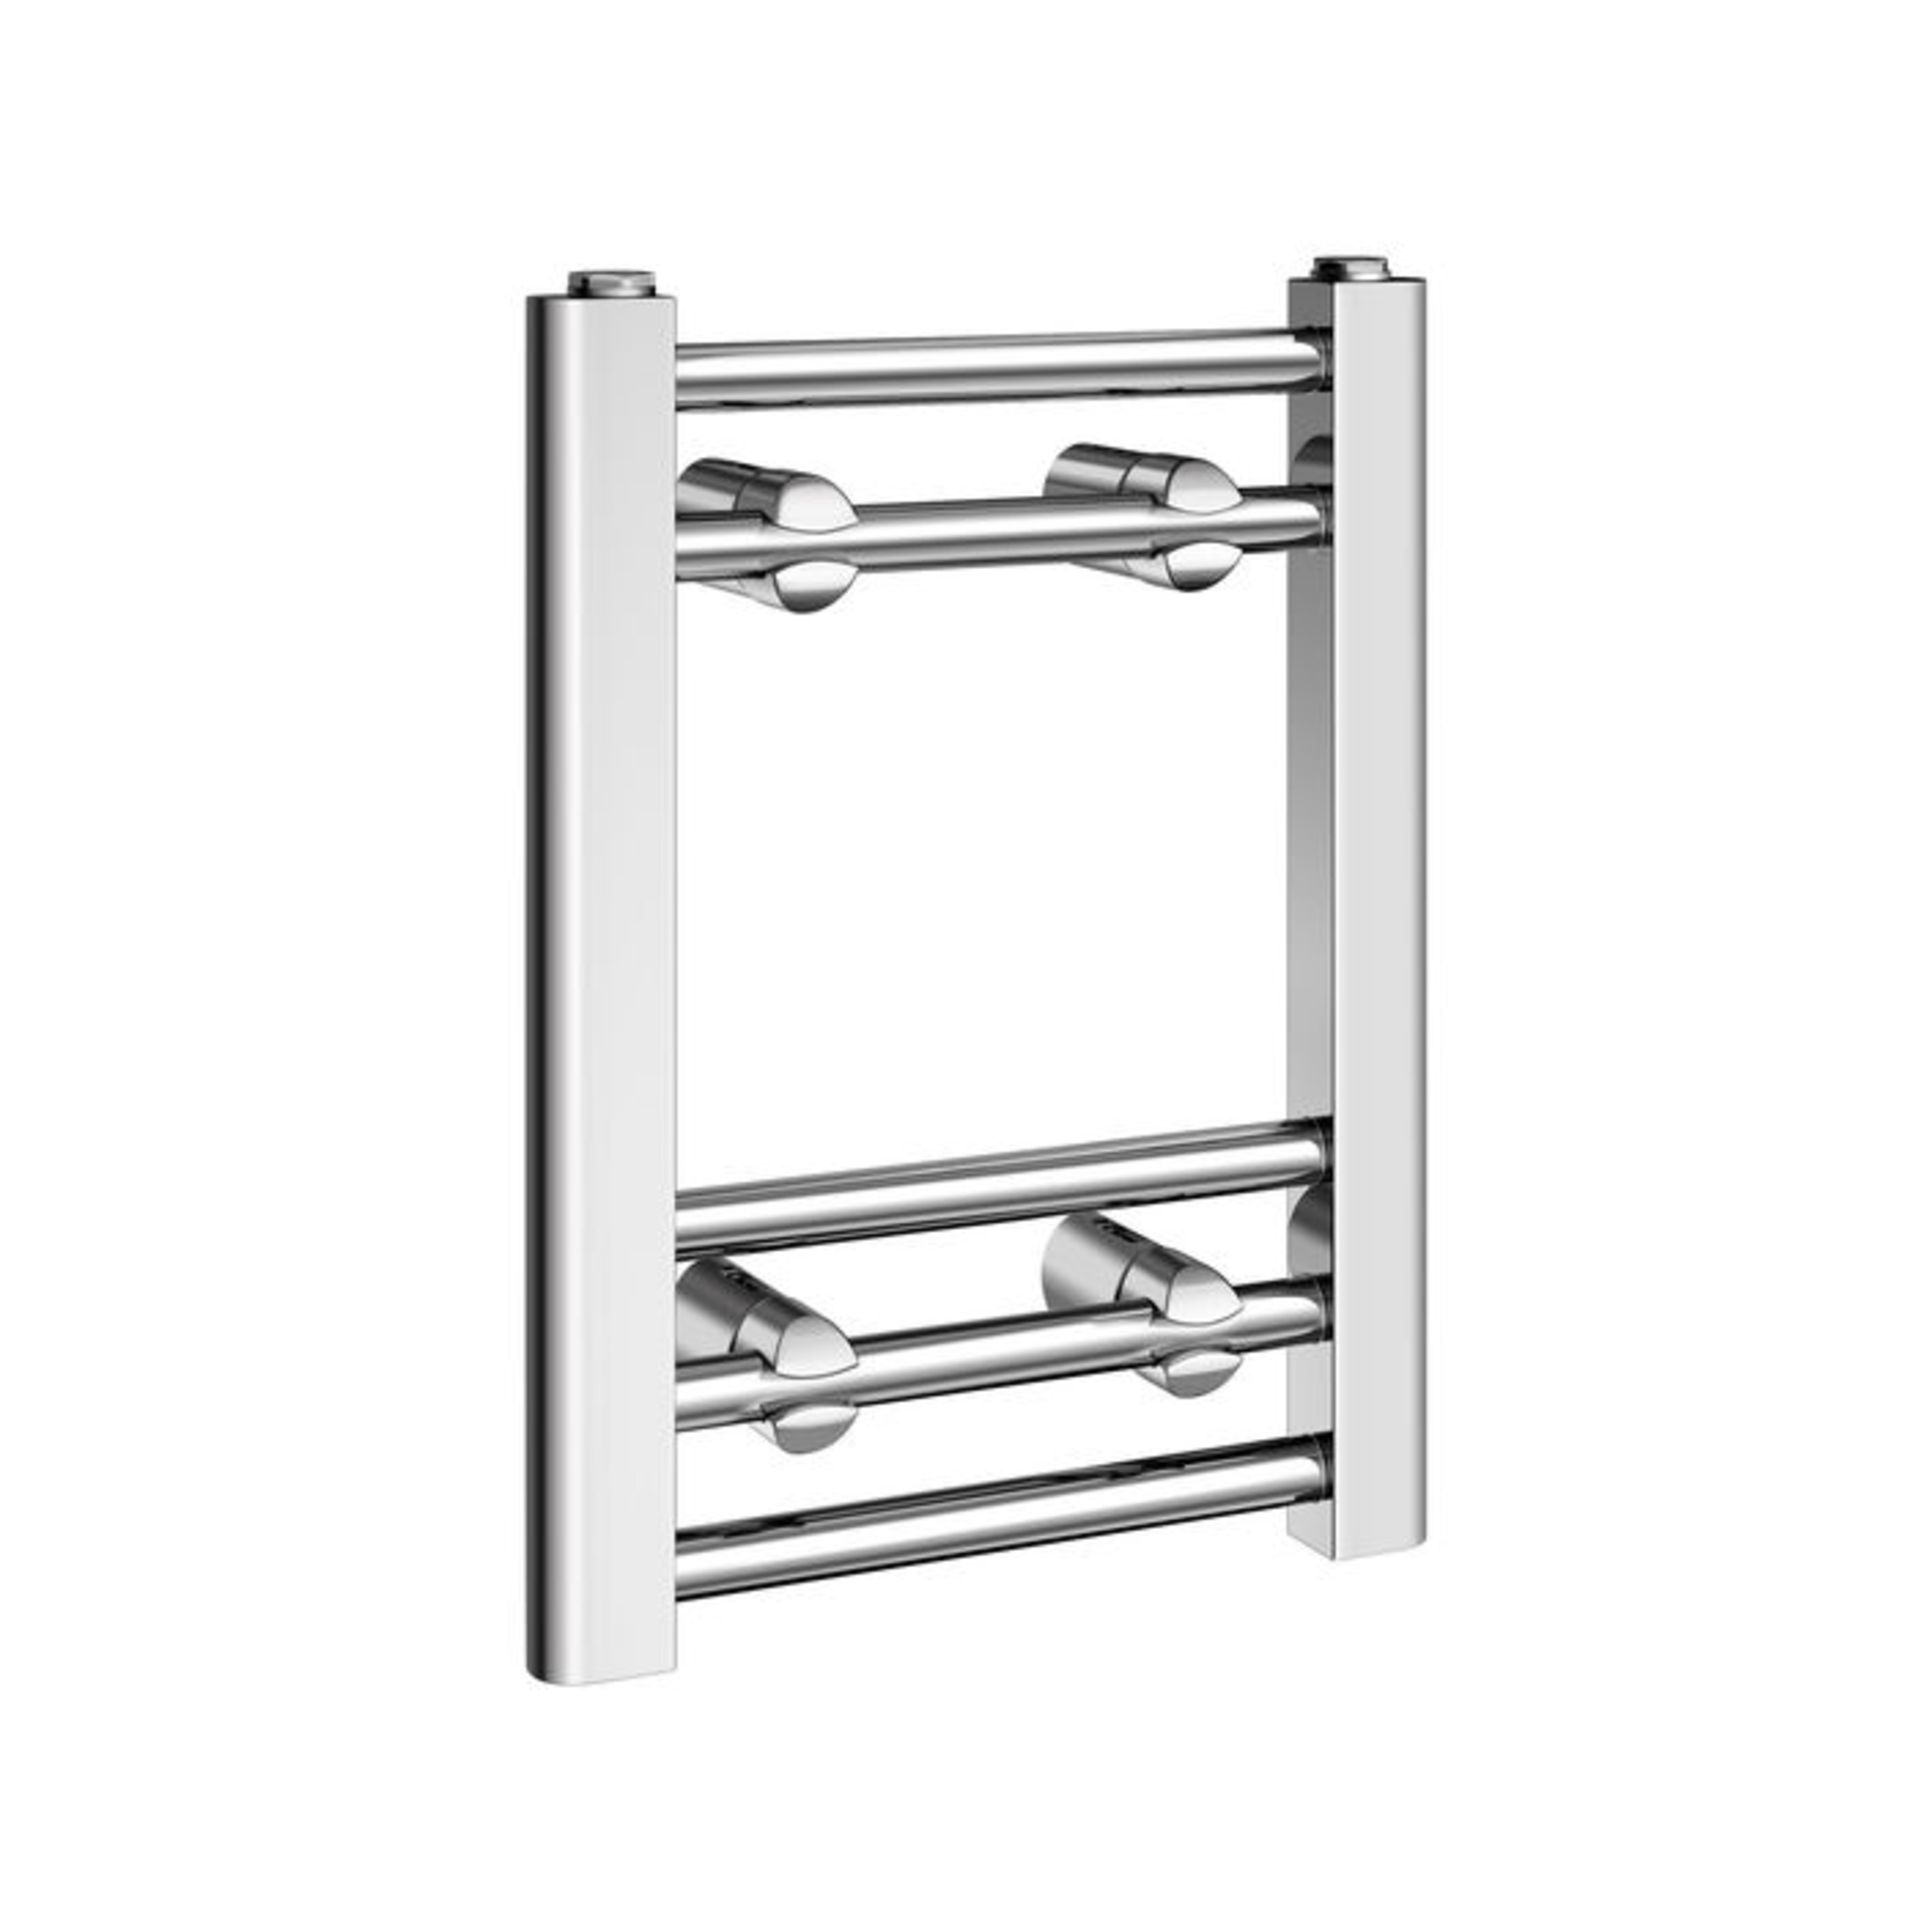 (UK138) 400x300mm - 20mm Tubes - Chrome Heated Straight Rail Ladder Towel Rail. Low carbon steel - Image 3 of 3